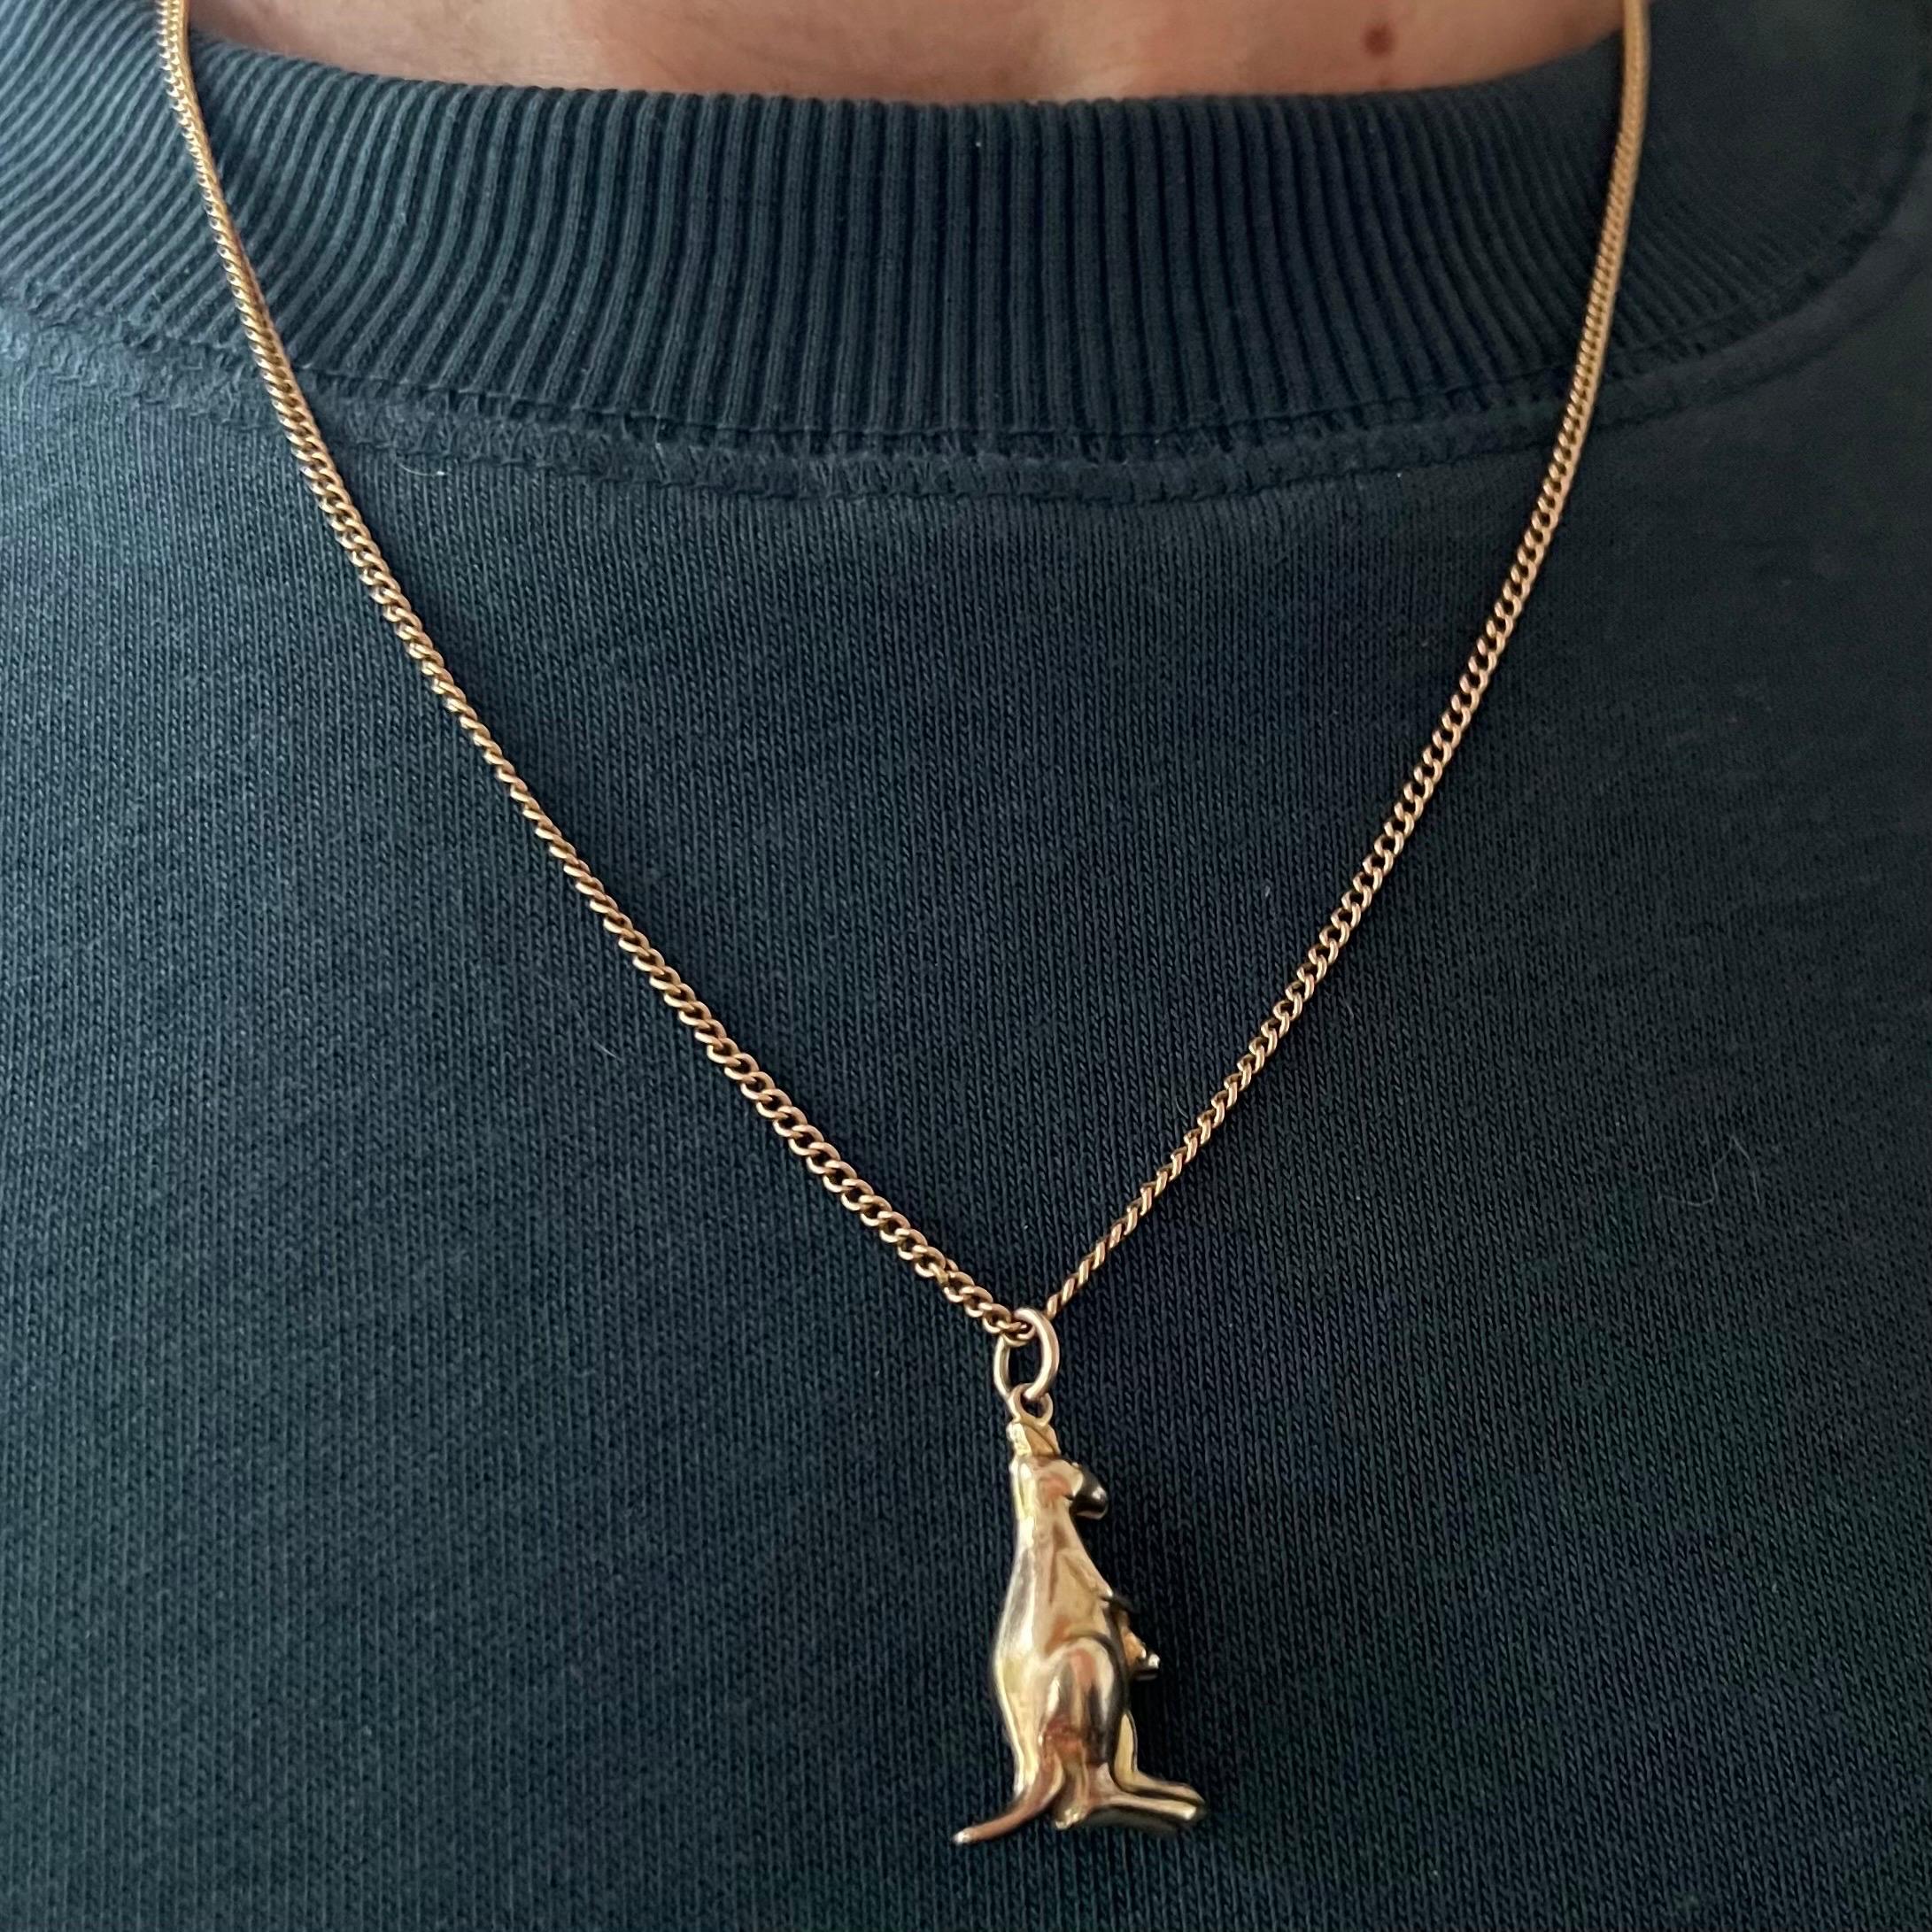 A vintage 9 karat yellow gold kangaroo charm pendant with a baby in hr pouch. The lovely kangaroo is beautifully detailed and created with an adorable baby kangaroo in her pouch. 

The kangaroo and emu are the symbols of Australia, they were chosen